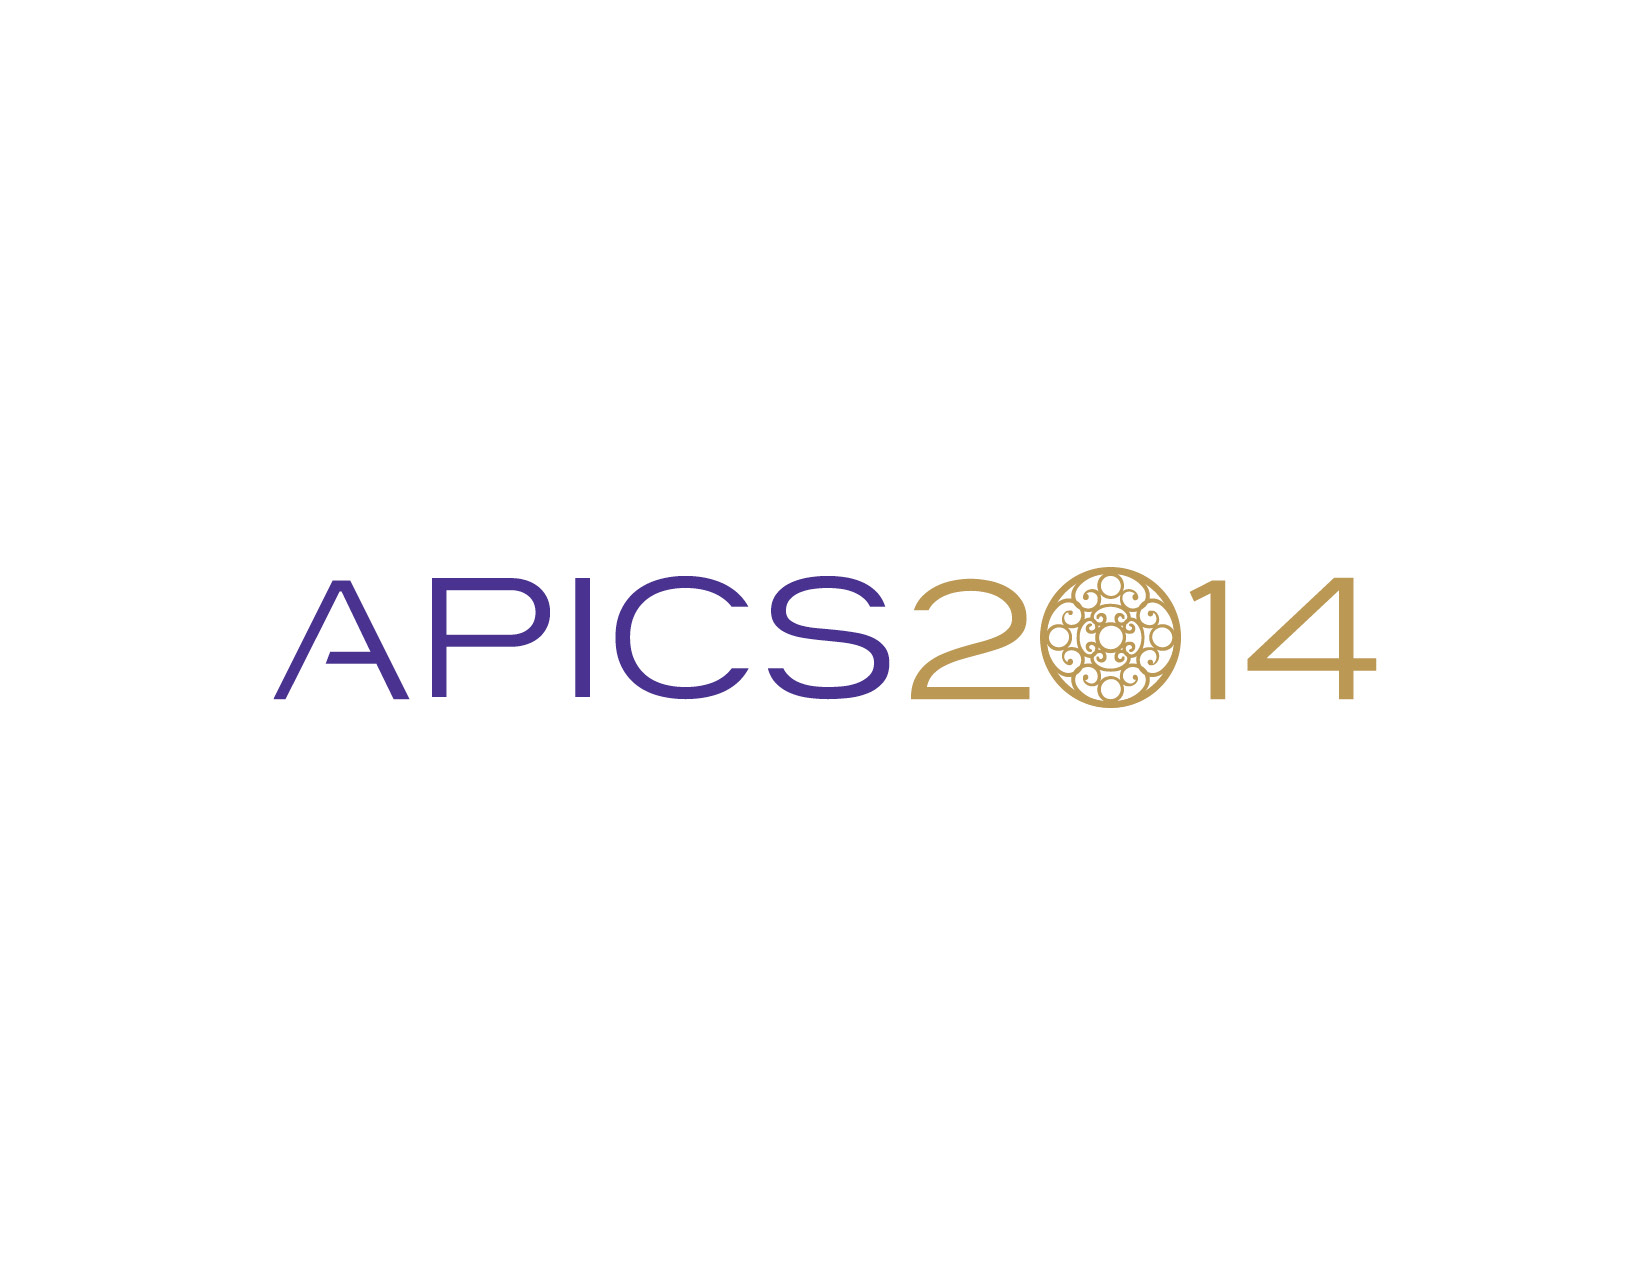  Treatment for APICS 2014 in New Orleans 